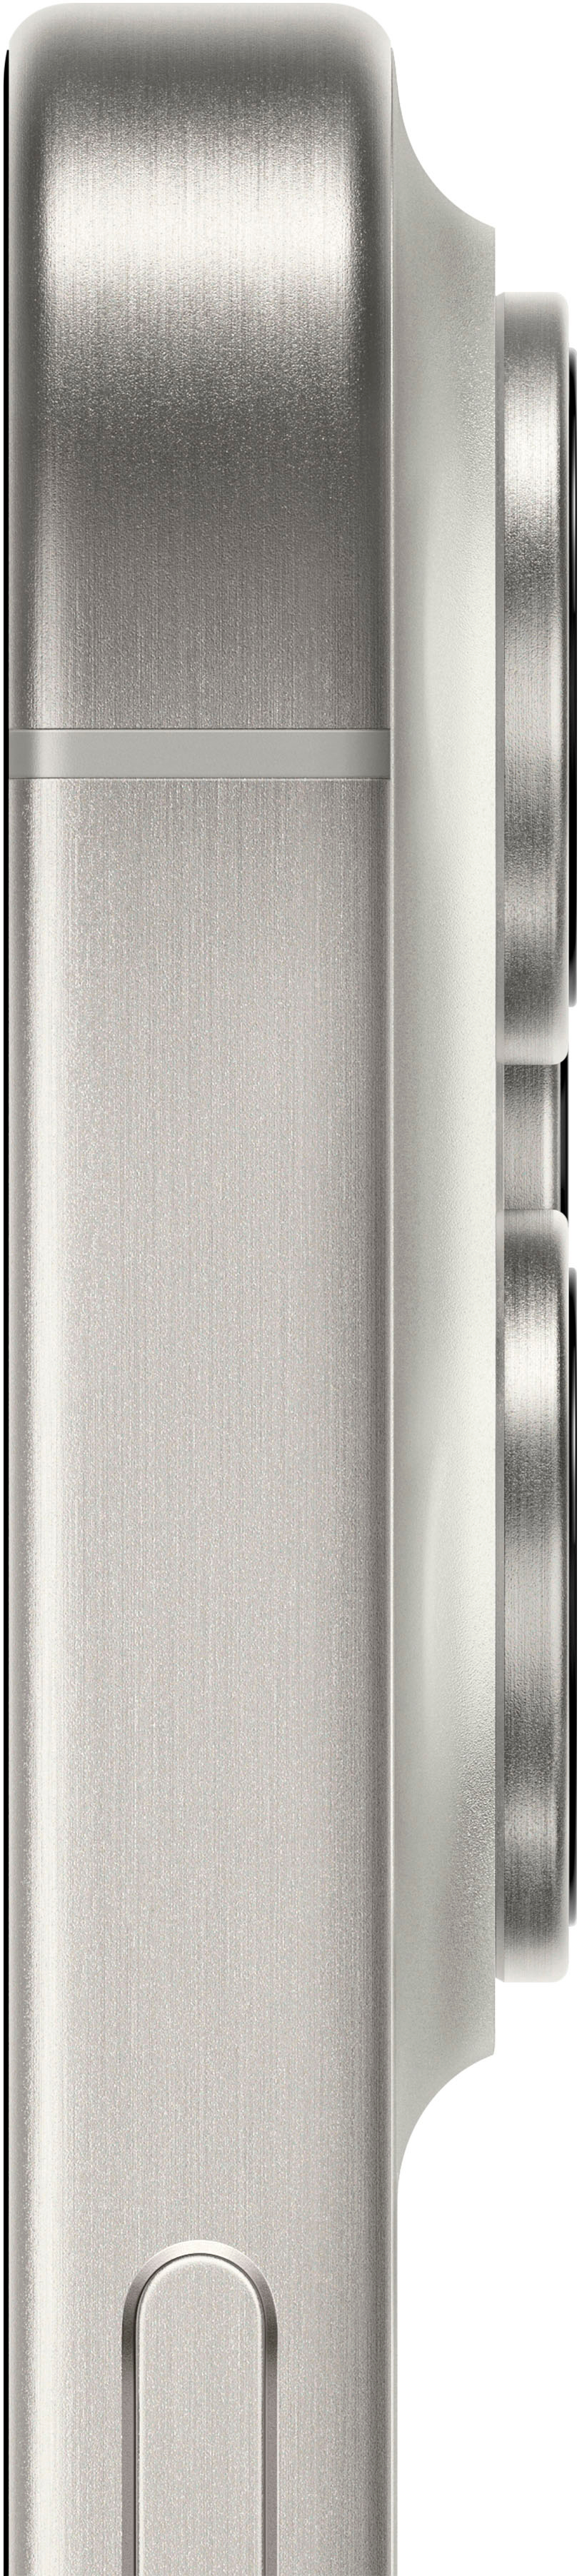 Apple iPhone 15 Pro Max 1TB White Titanium (AT&T) MU6G3LL/A - Best Buy | alle Smartphones